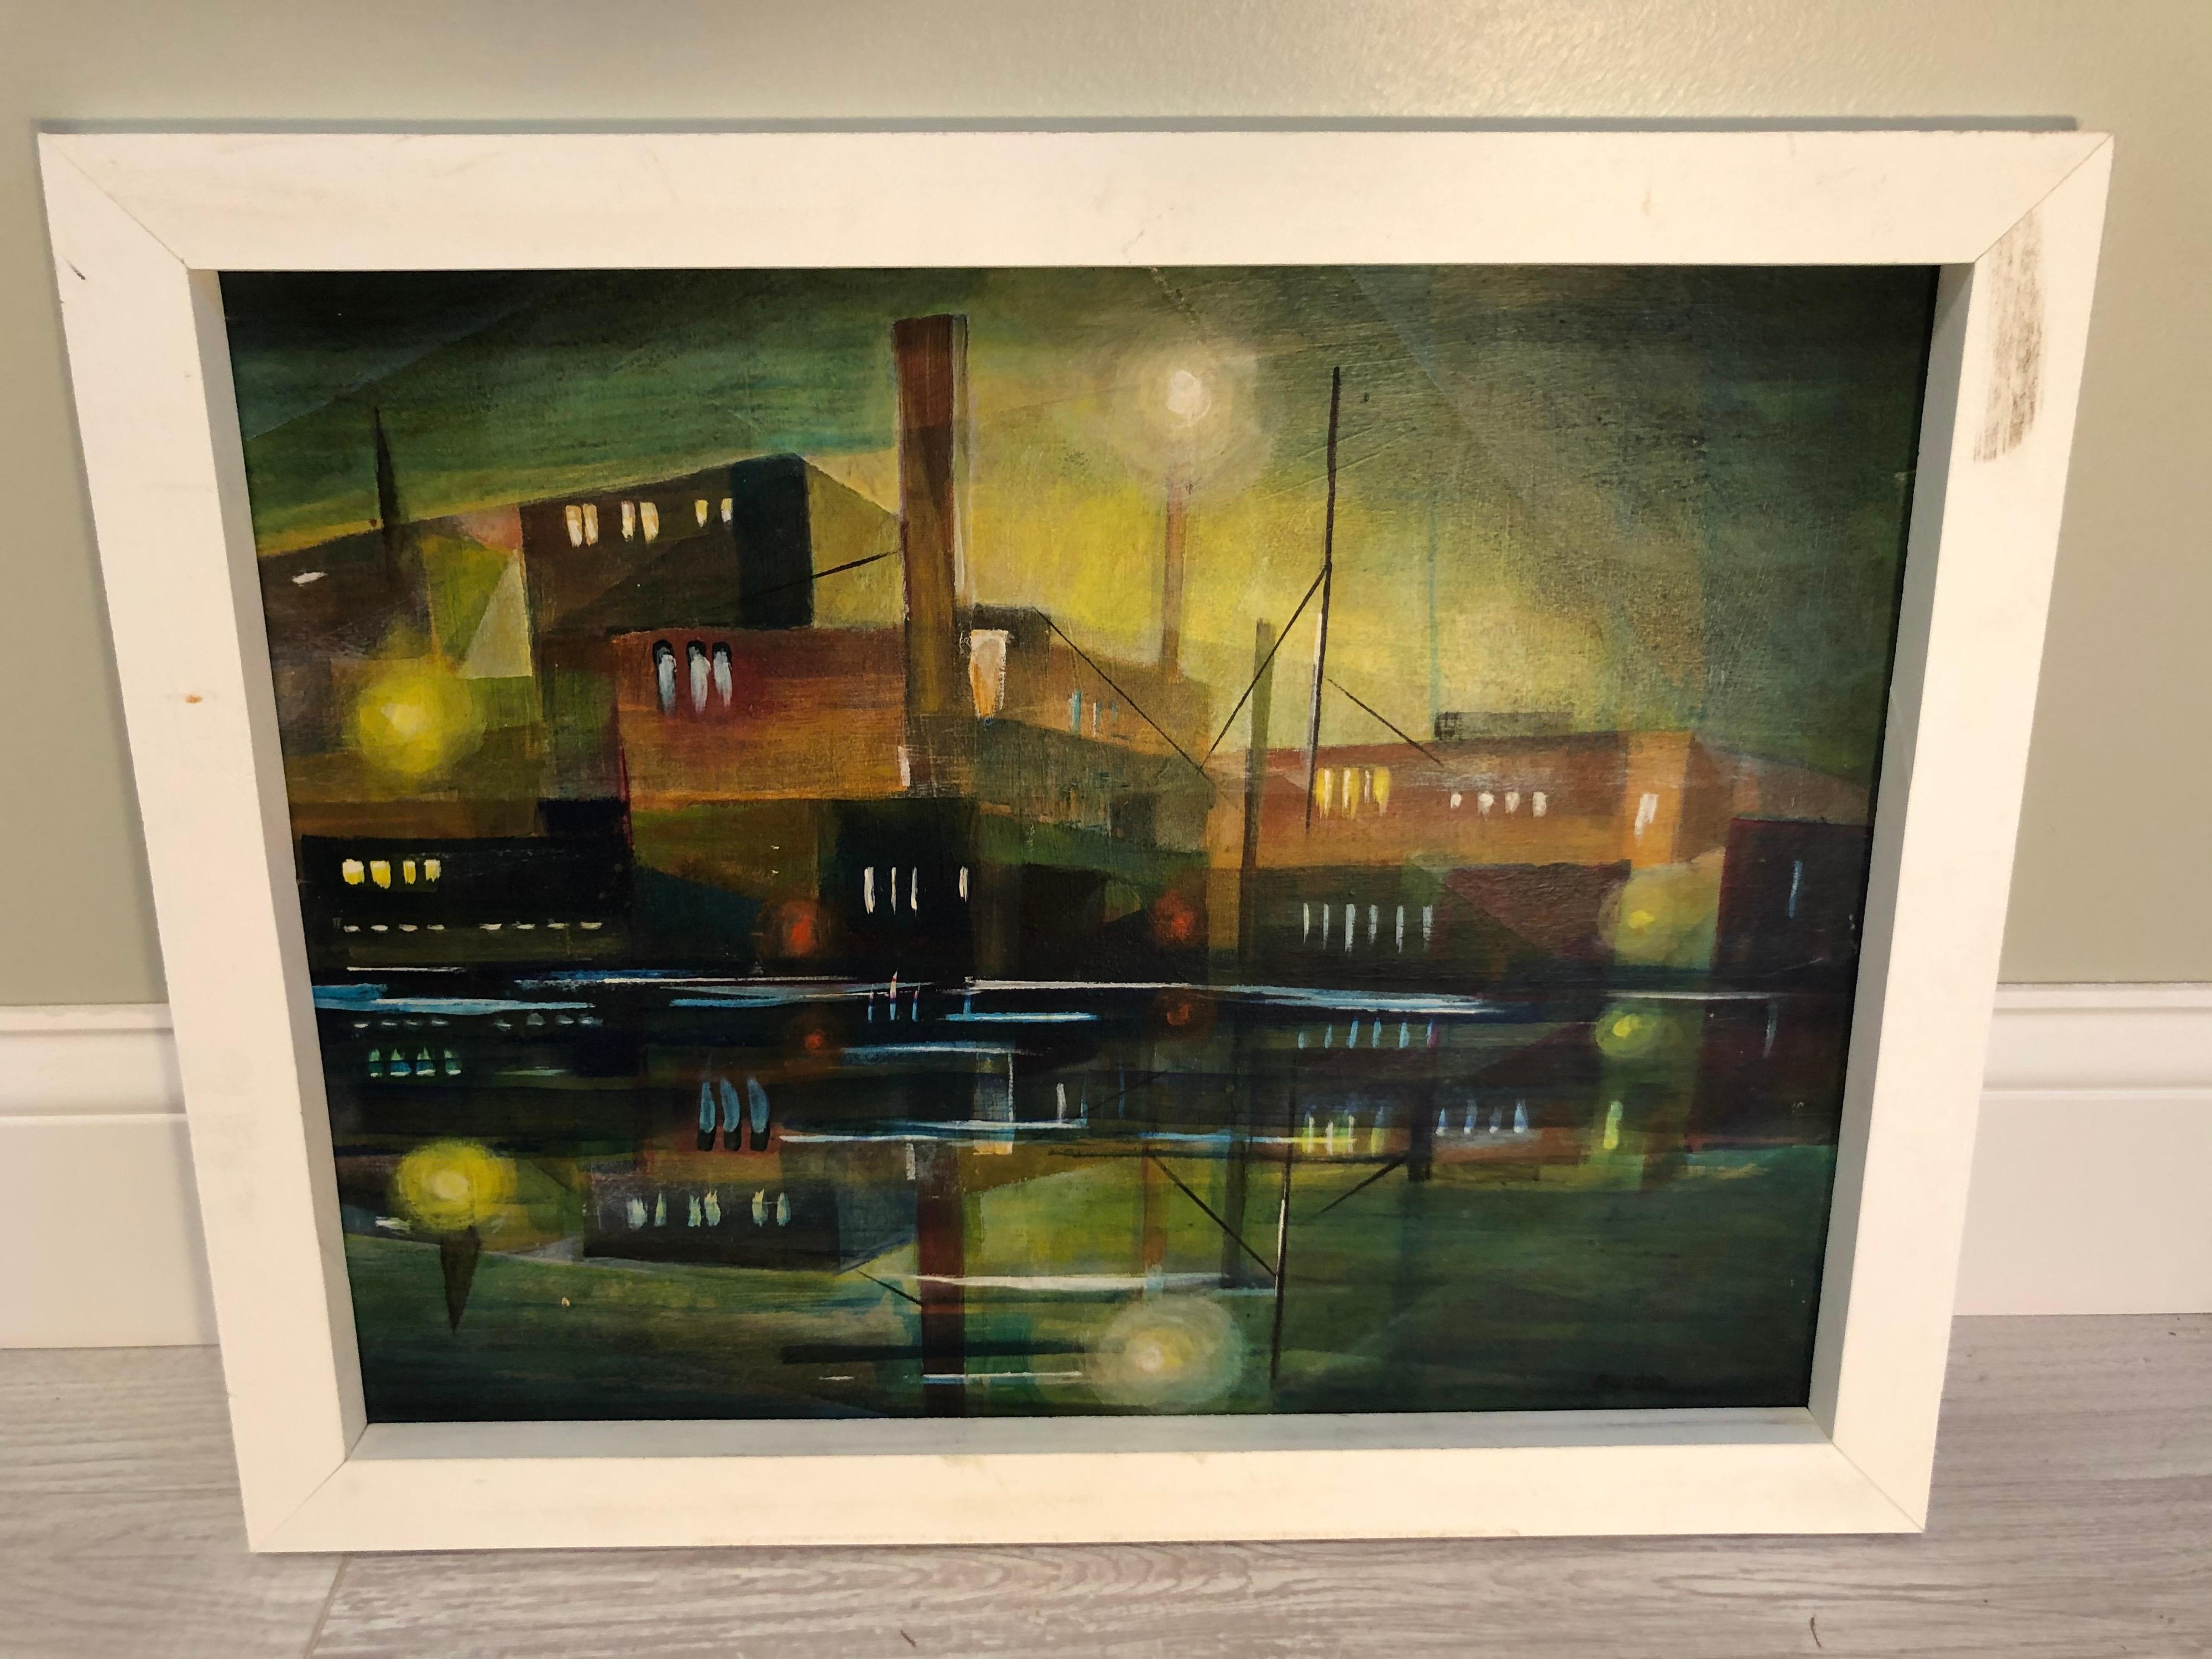 Mid Century Cubist Painting of an Industrial Building In Good Condition For Sale In Redding, CT